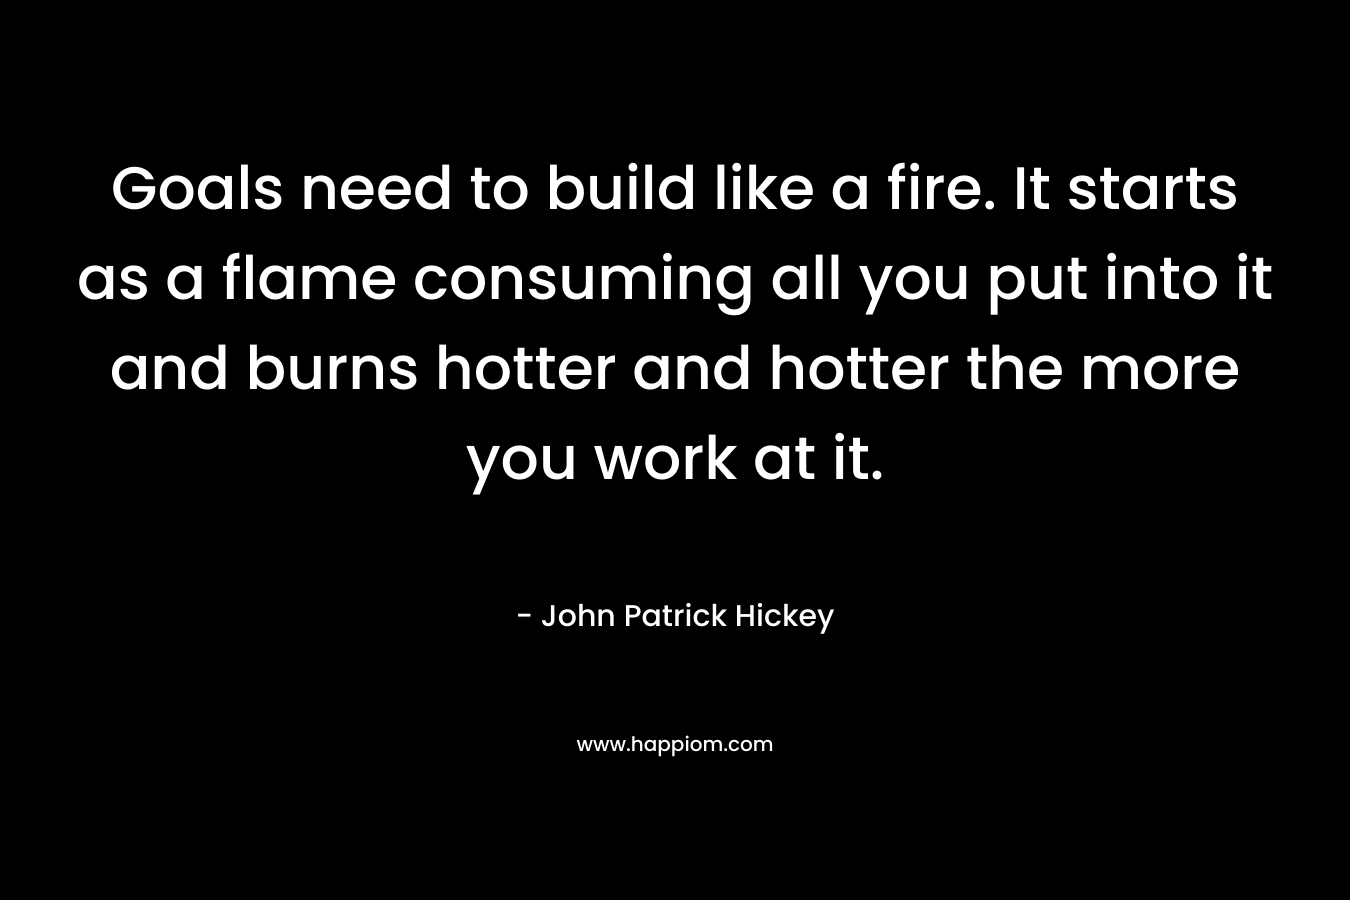 Goals need to build like a fire. It starts as a flame consuming all you put into it and burns hotter and hotter the more you work at it. – John Patrick Hickey